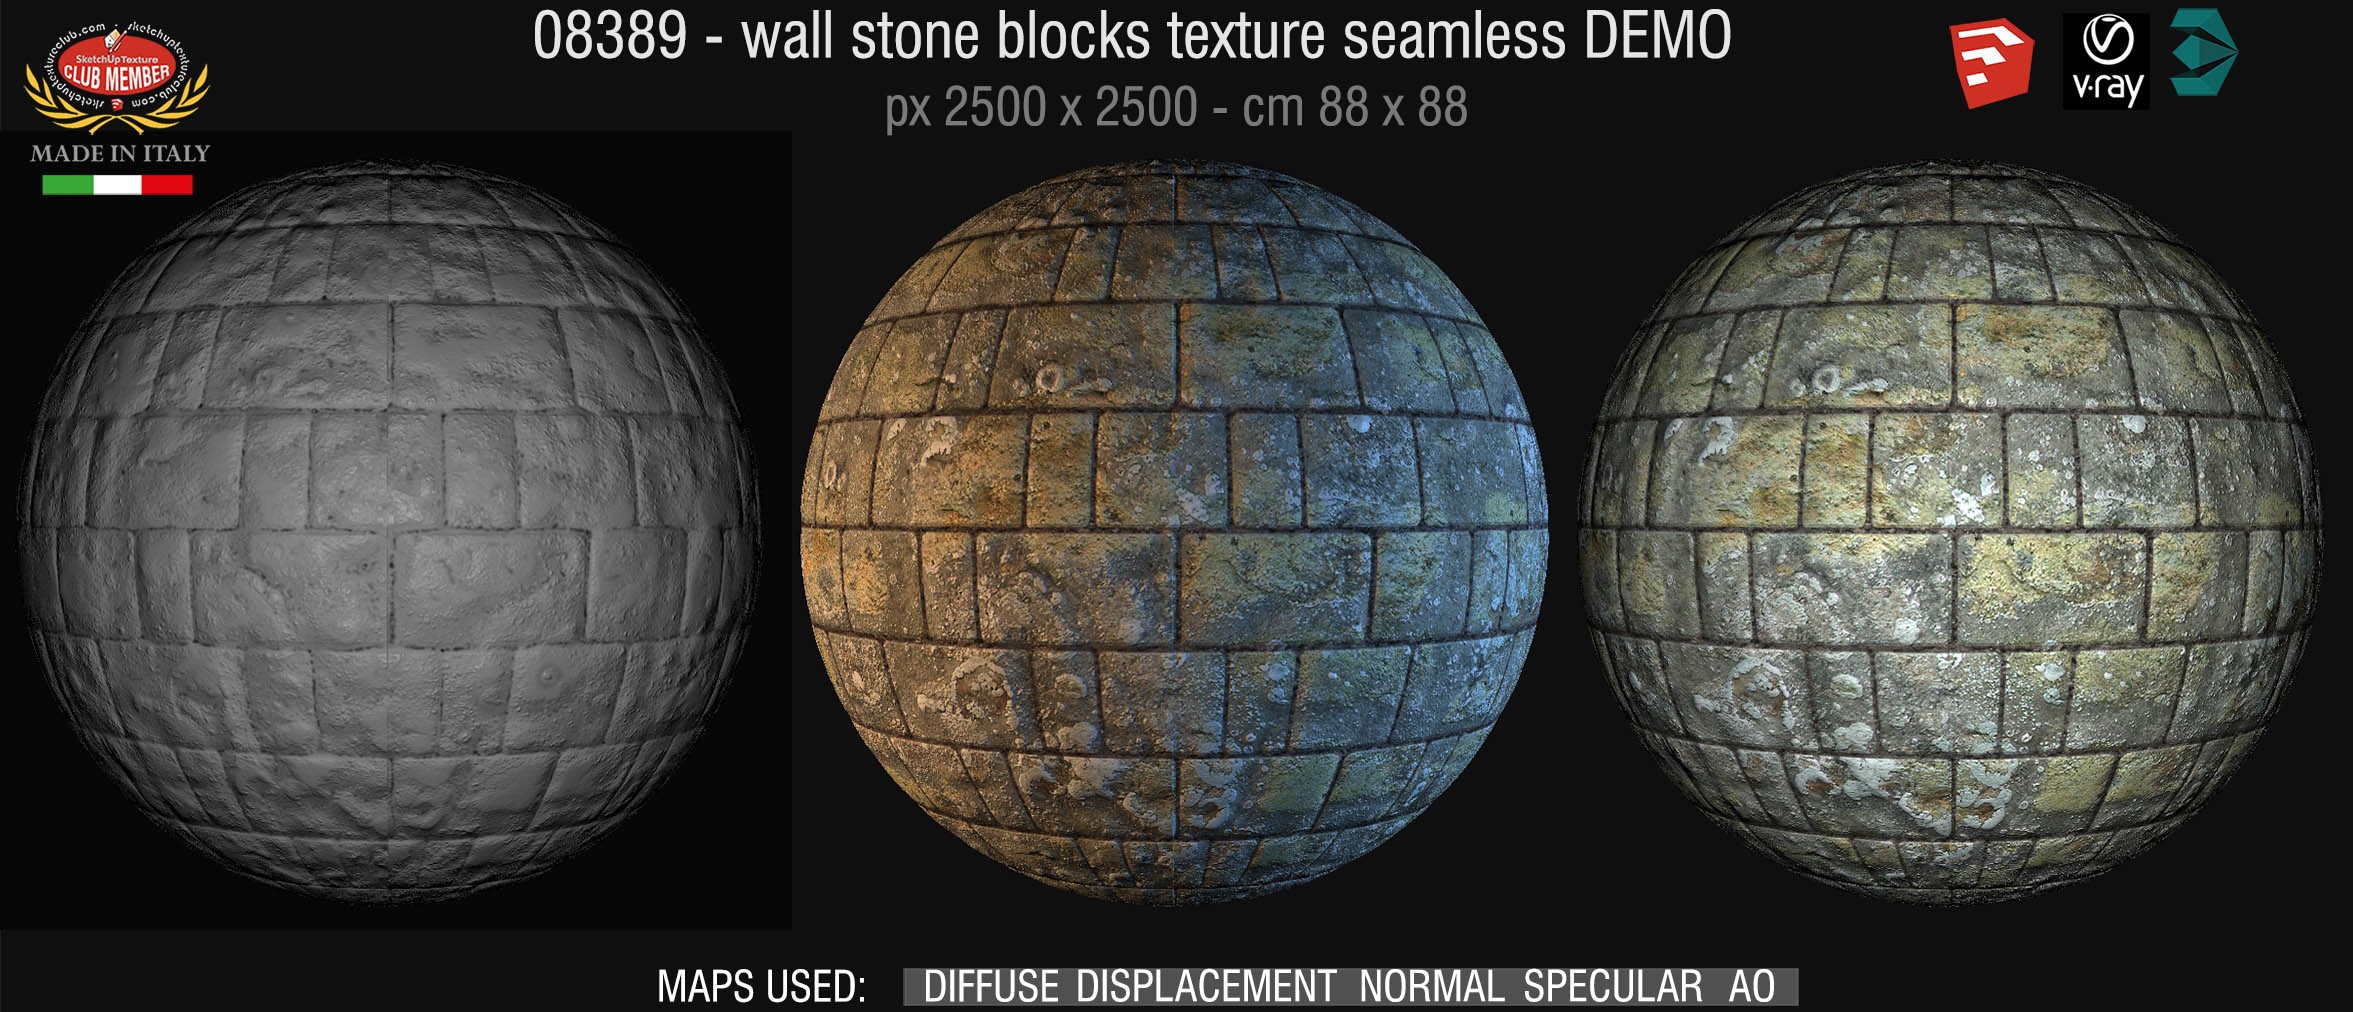 08389 HR Wall stone with regular blocks texture + maps DEMO